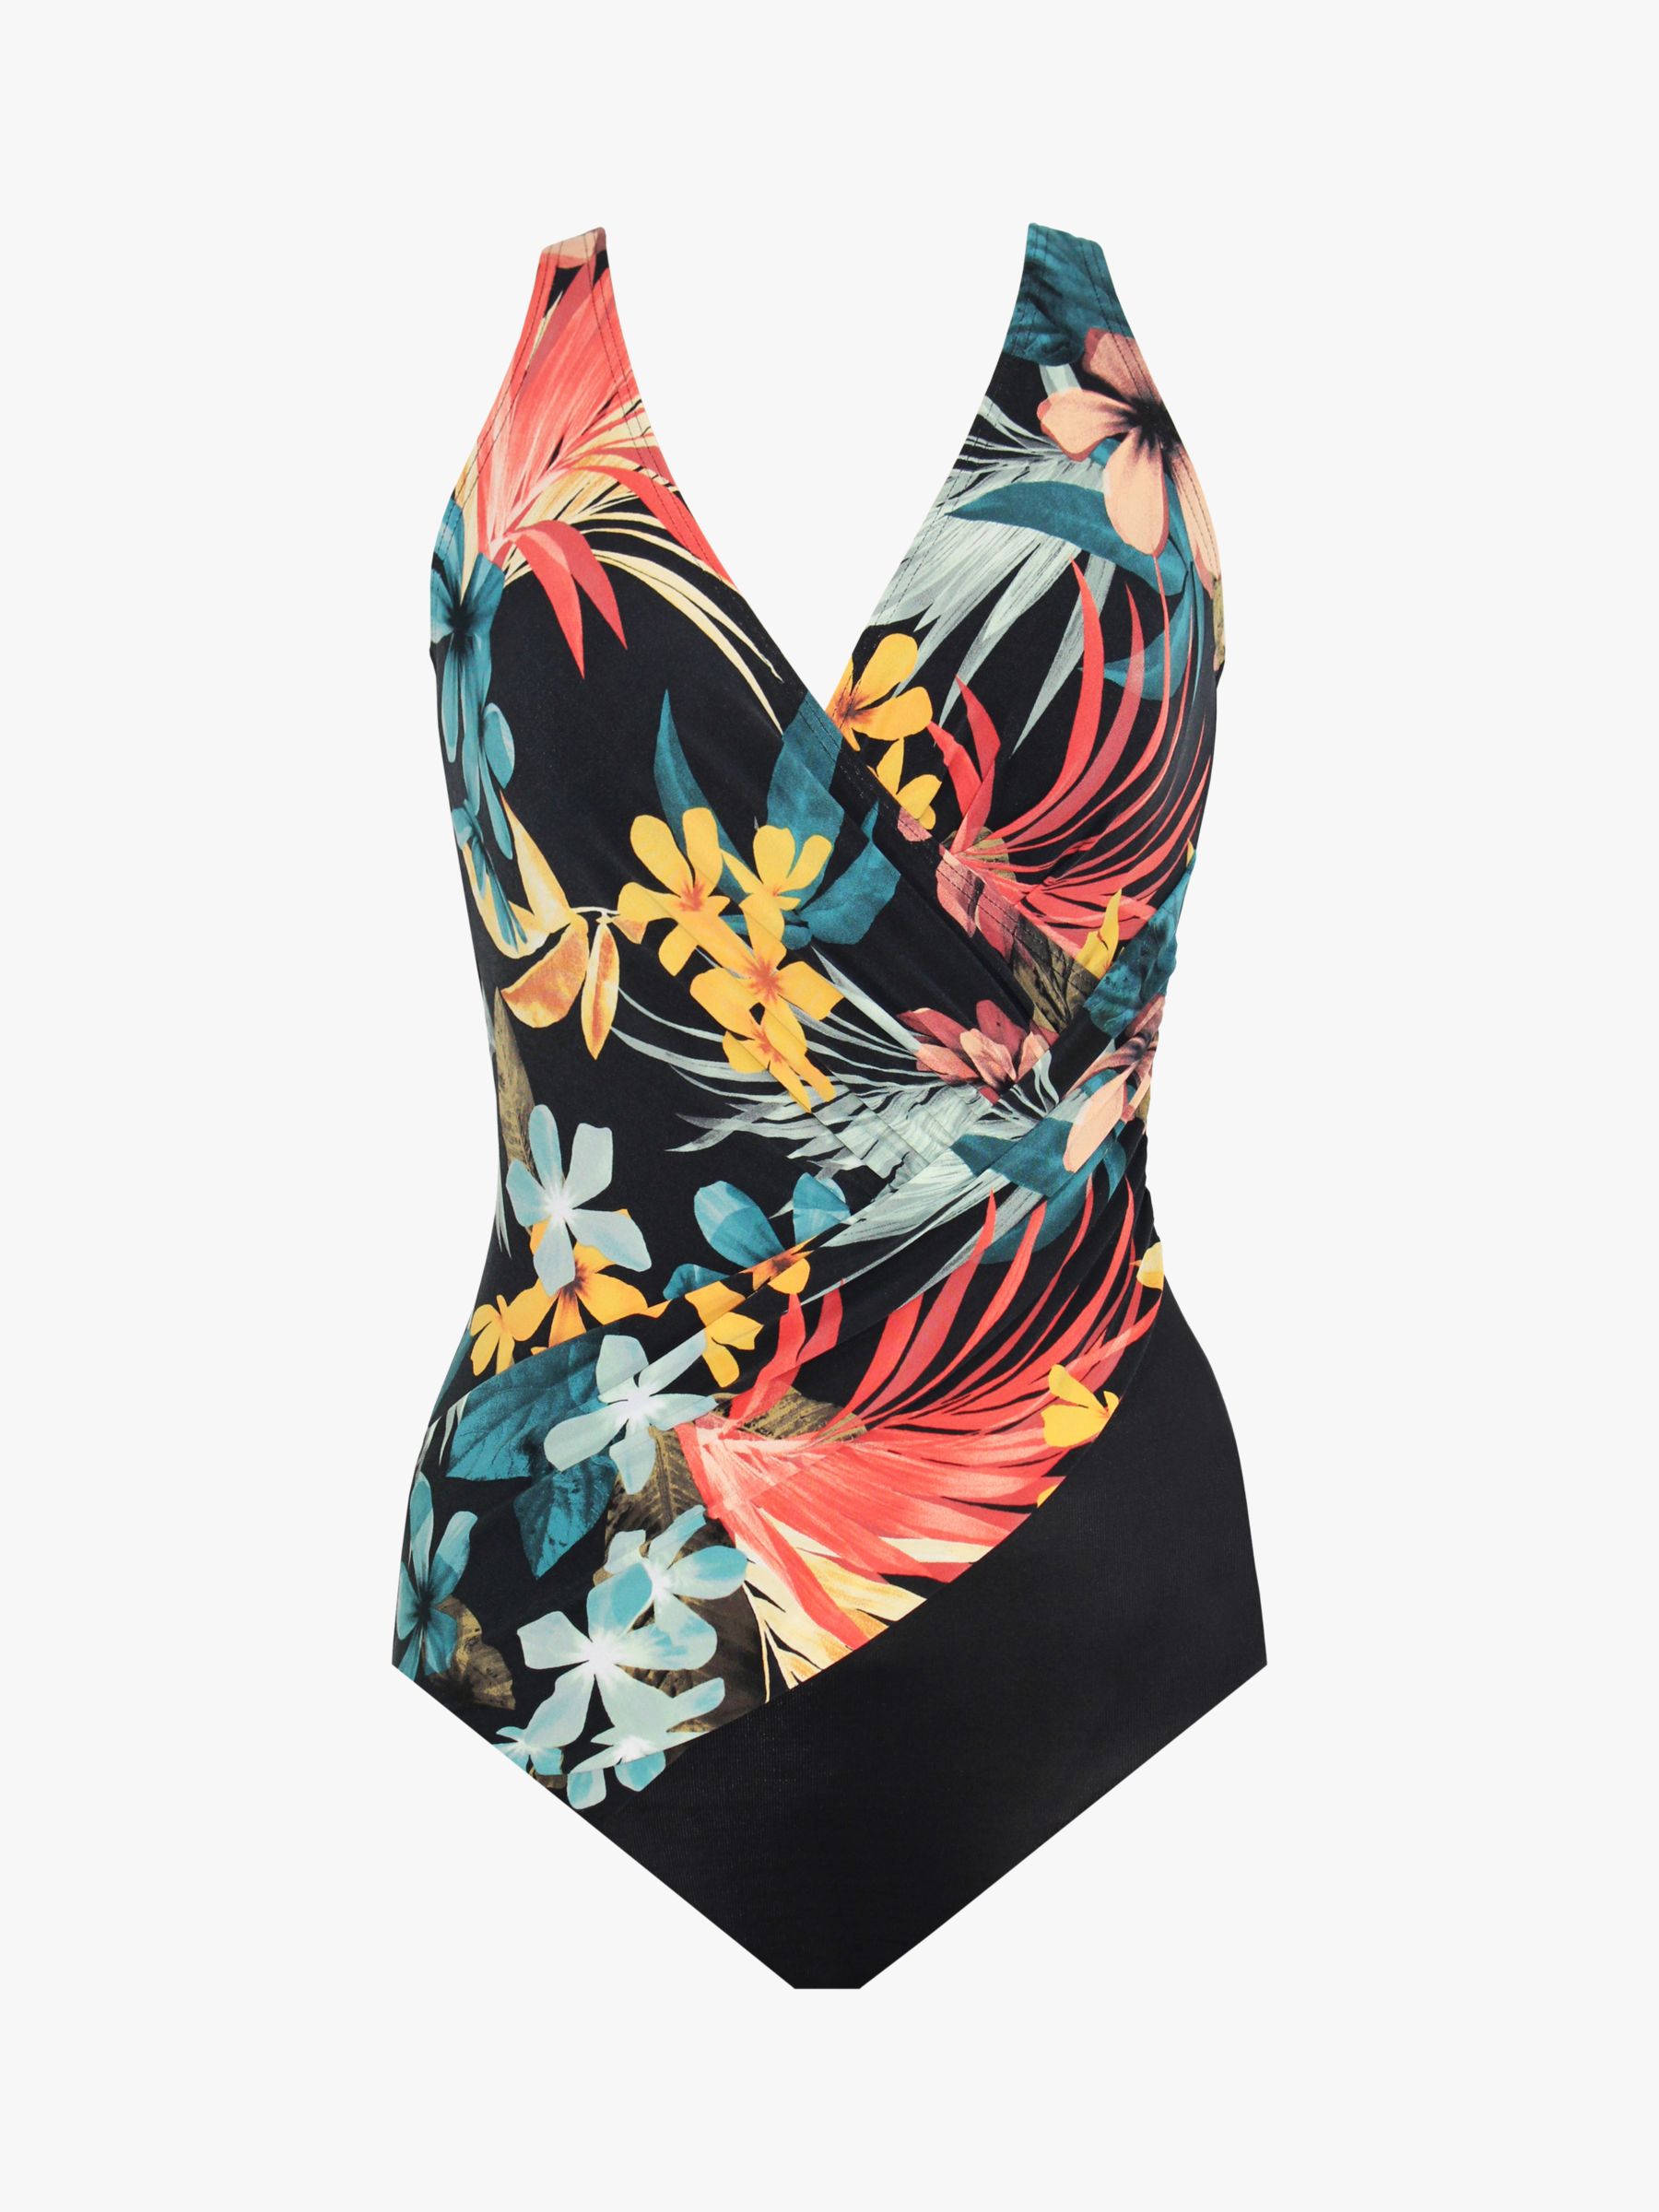 We tried a swimsuit called the MiracleSuit — and it really is a miracle